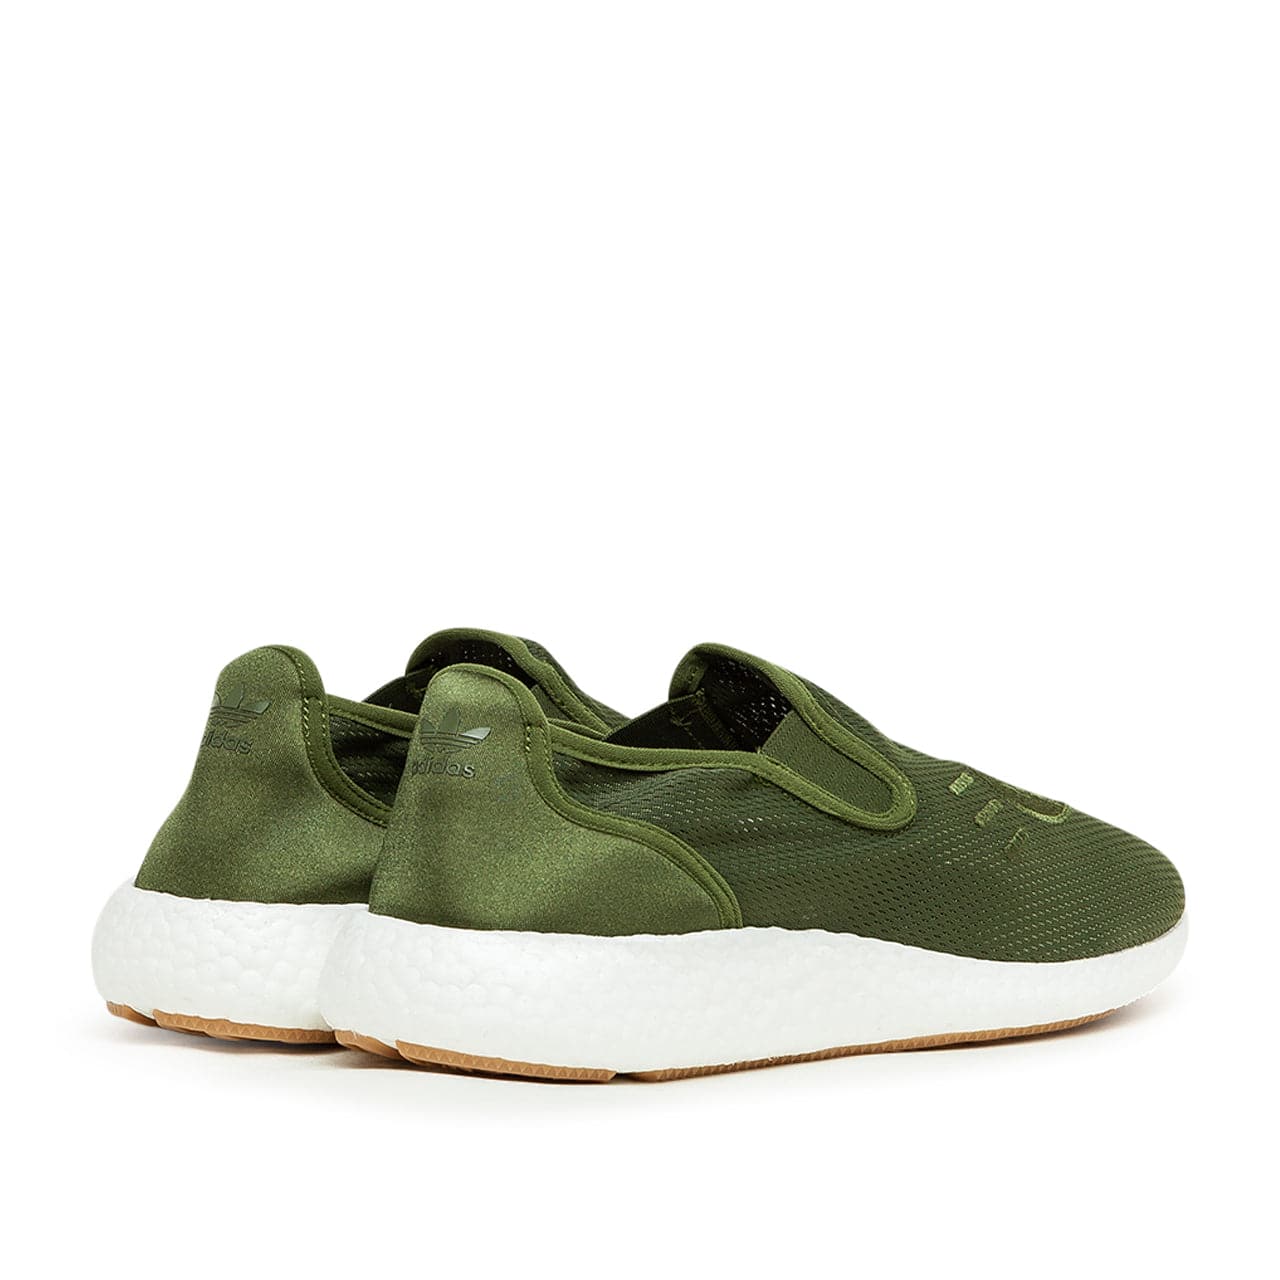 adidas x Human Made Pure Slip-On (Olive / White)